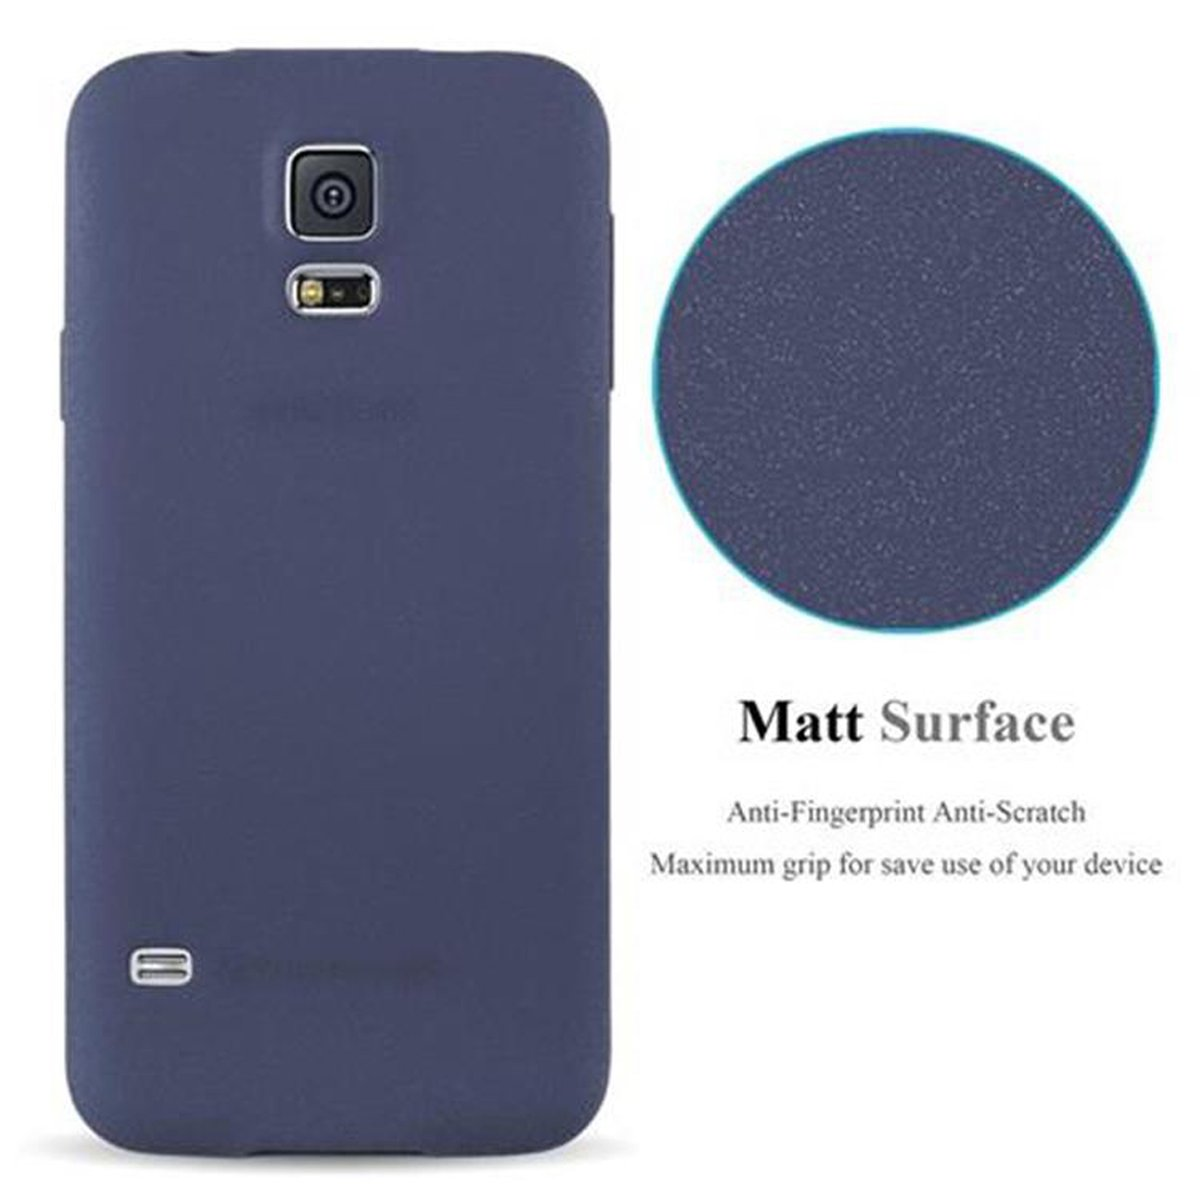 CADORABO TPU Galaxy Backcover, Samsung, NEO, BLAU Frosted Schutzhülle, S5 FROST S5 / DUNKEL